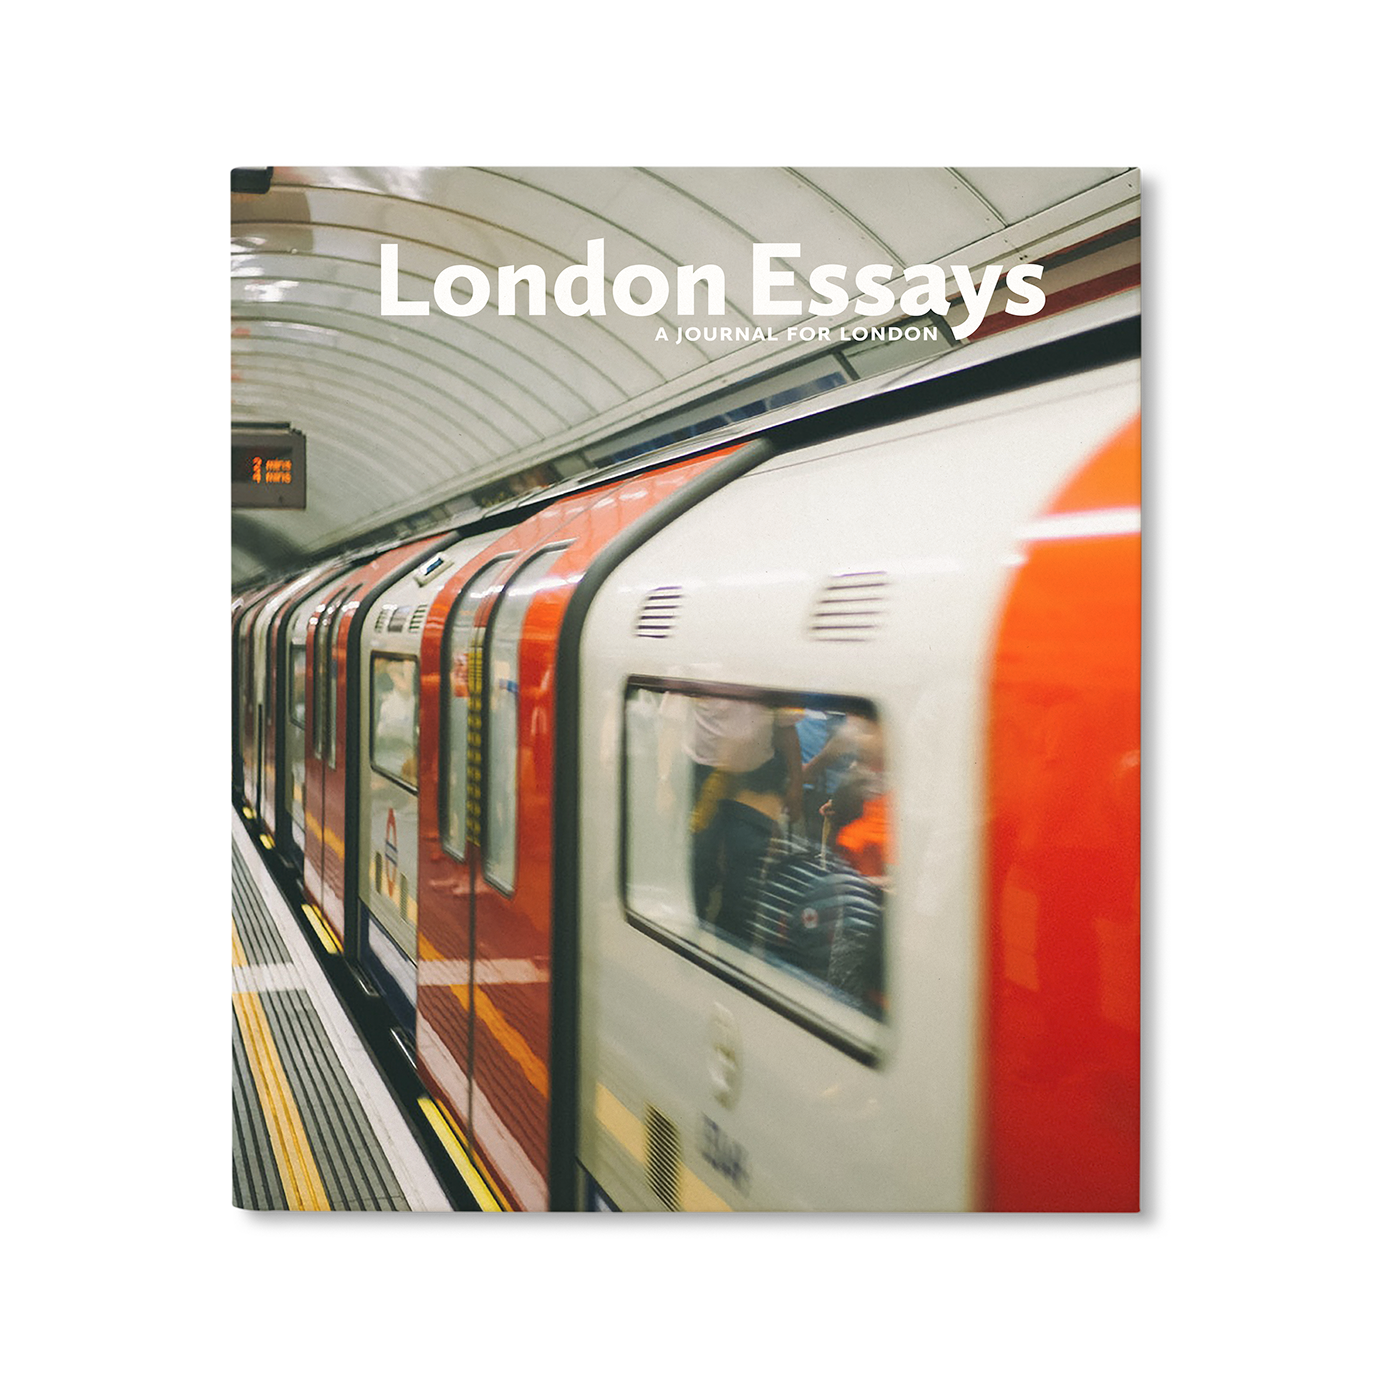 London essays editorial book design word and image